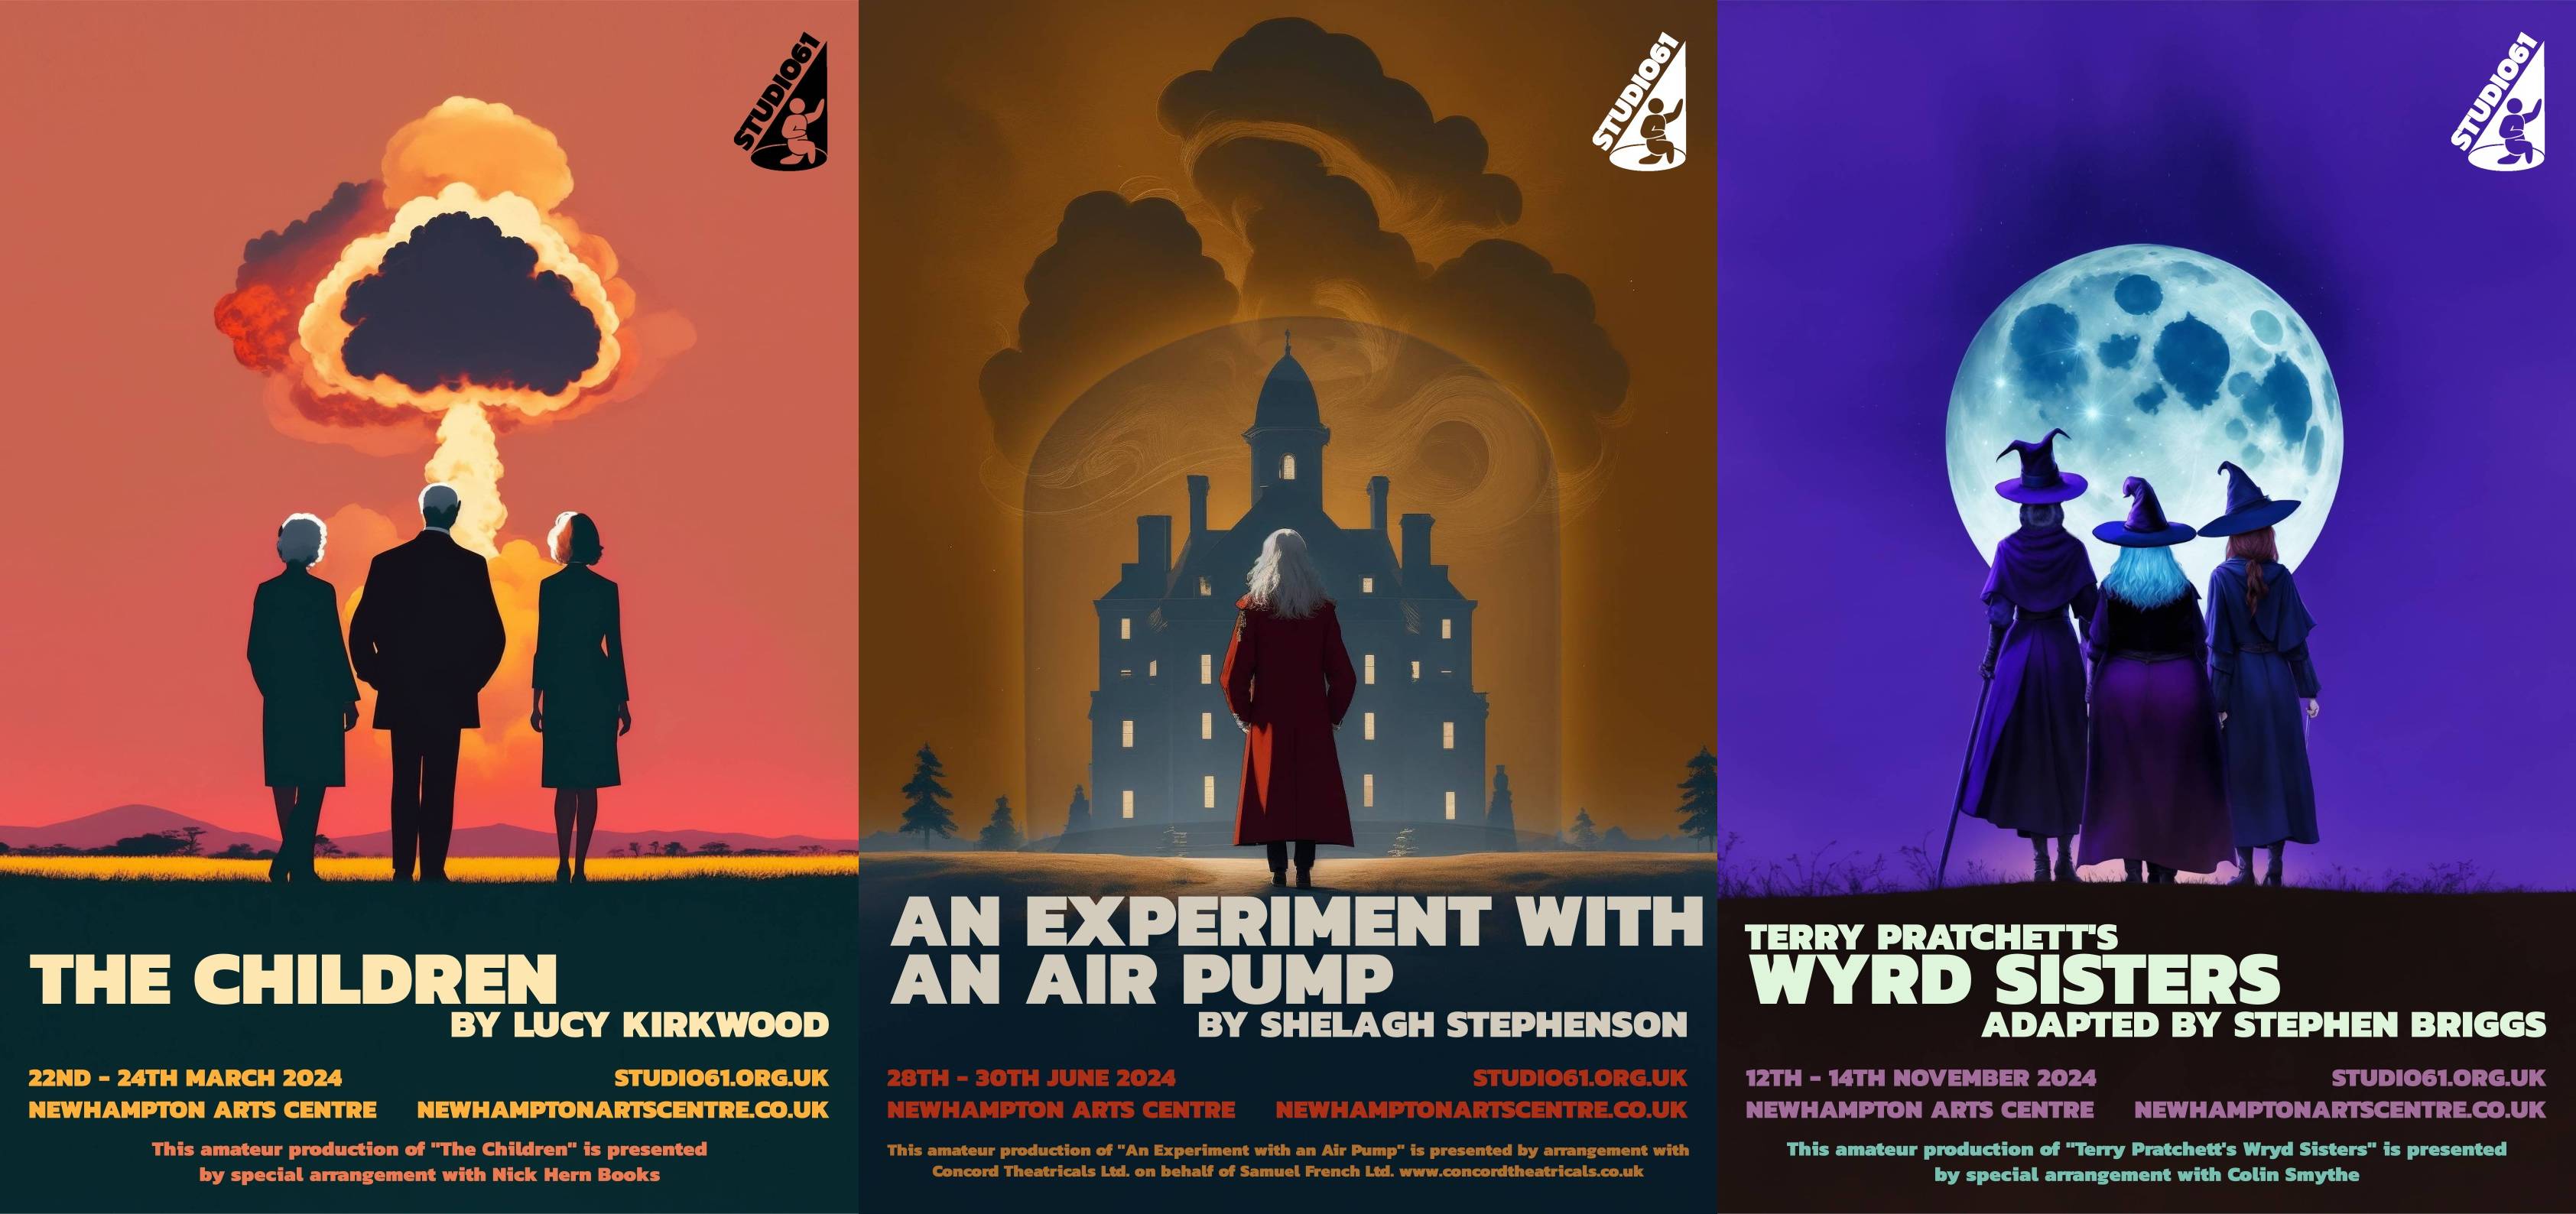 Posters for The Children, An Experiment with an Air Pump and Terry Pratchett's Wyrd Sisters